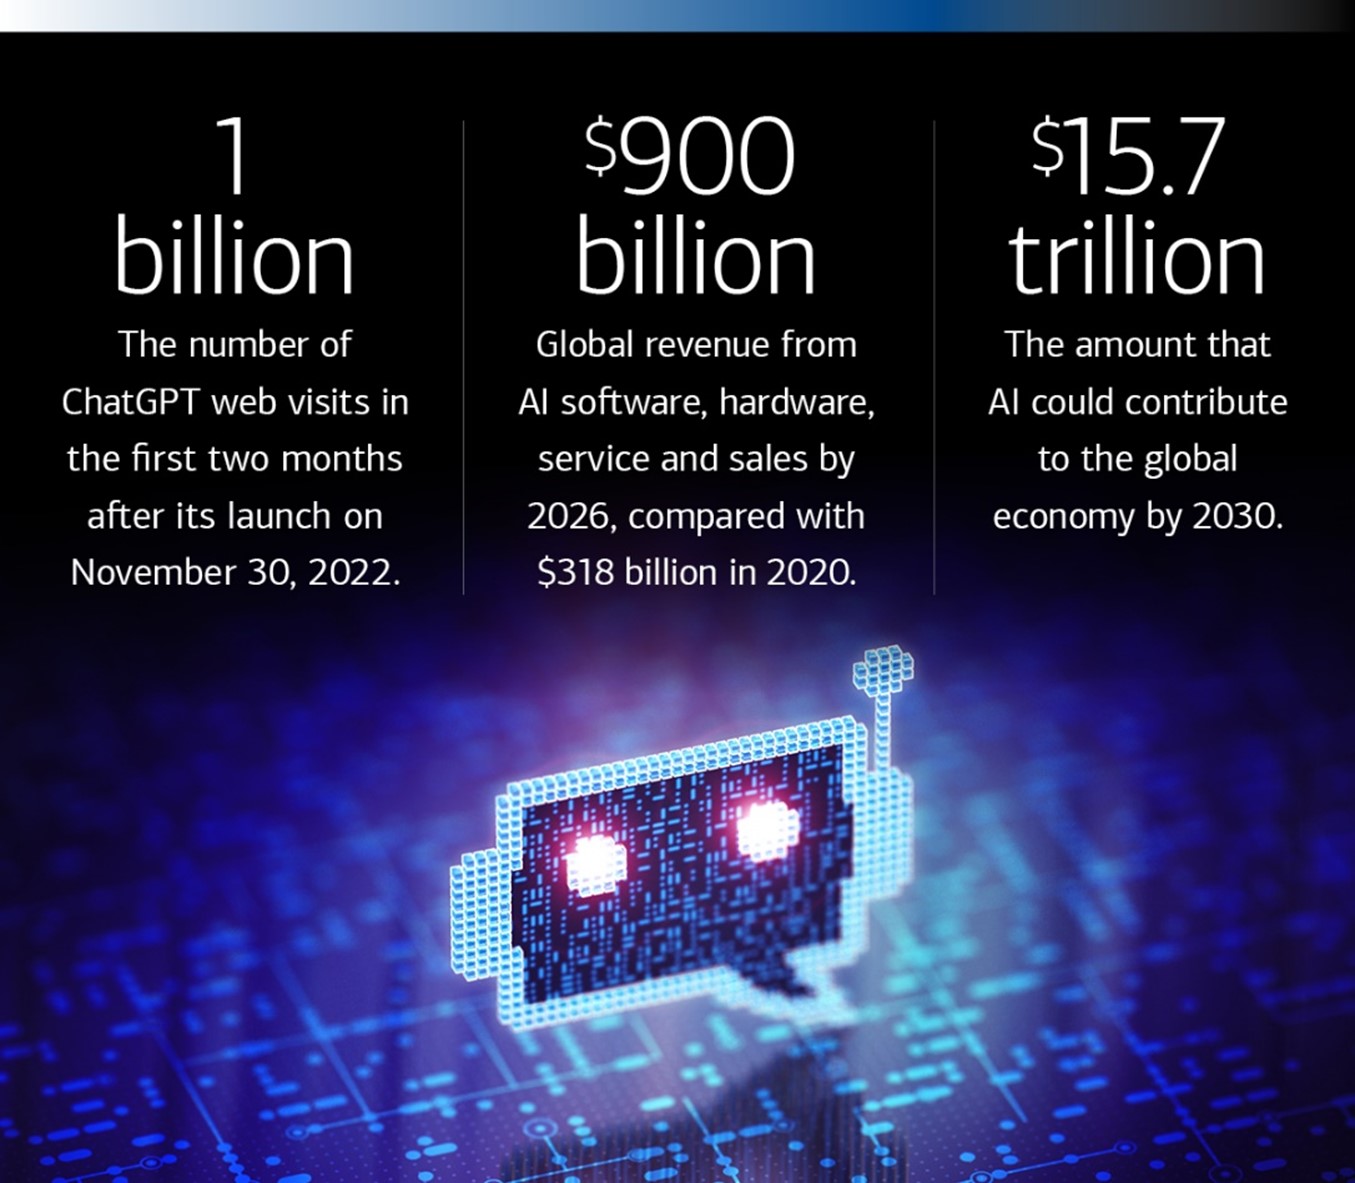 Image Source: BofA Global Research, “Me, Myself and AI—Artificial Intelligence Primer,” February 28, 2023; BofA Global Research, IDC; and PwC.